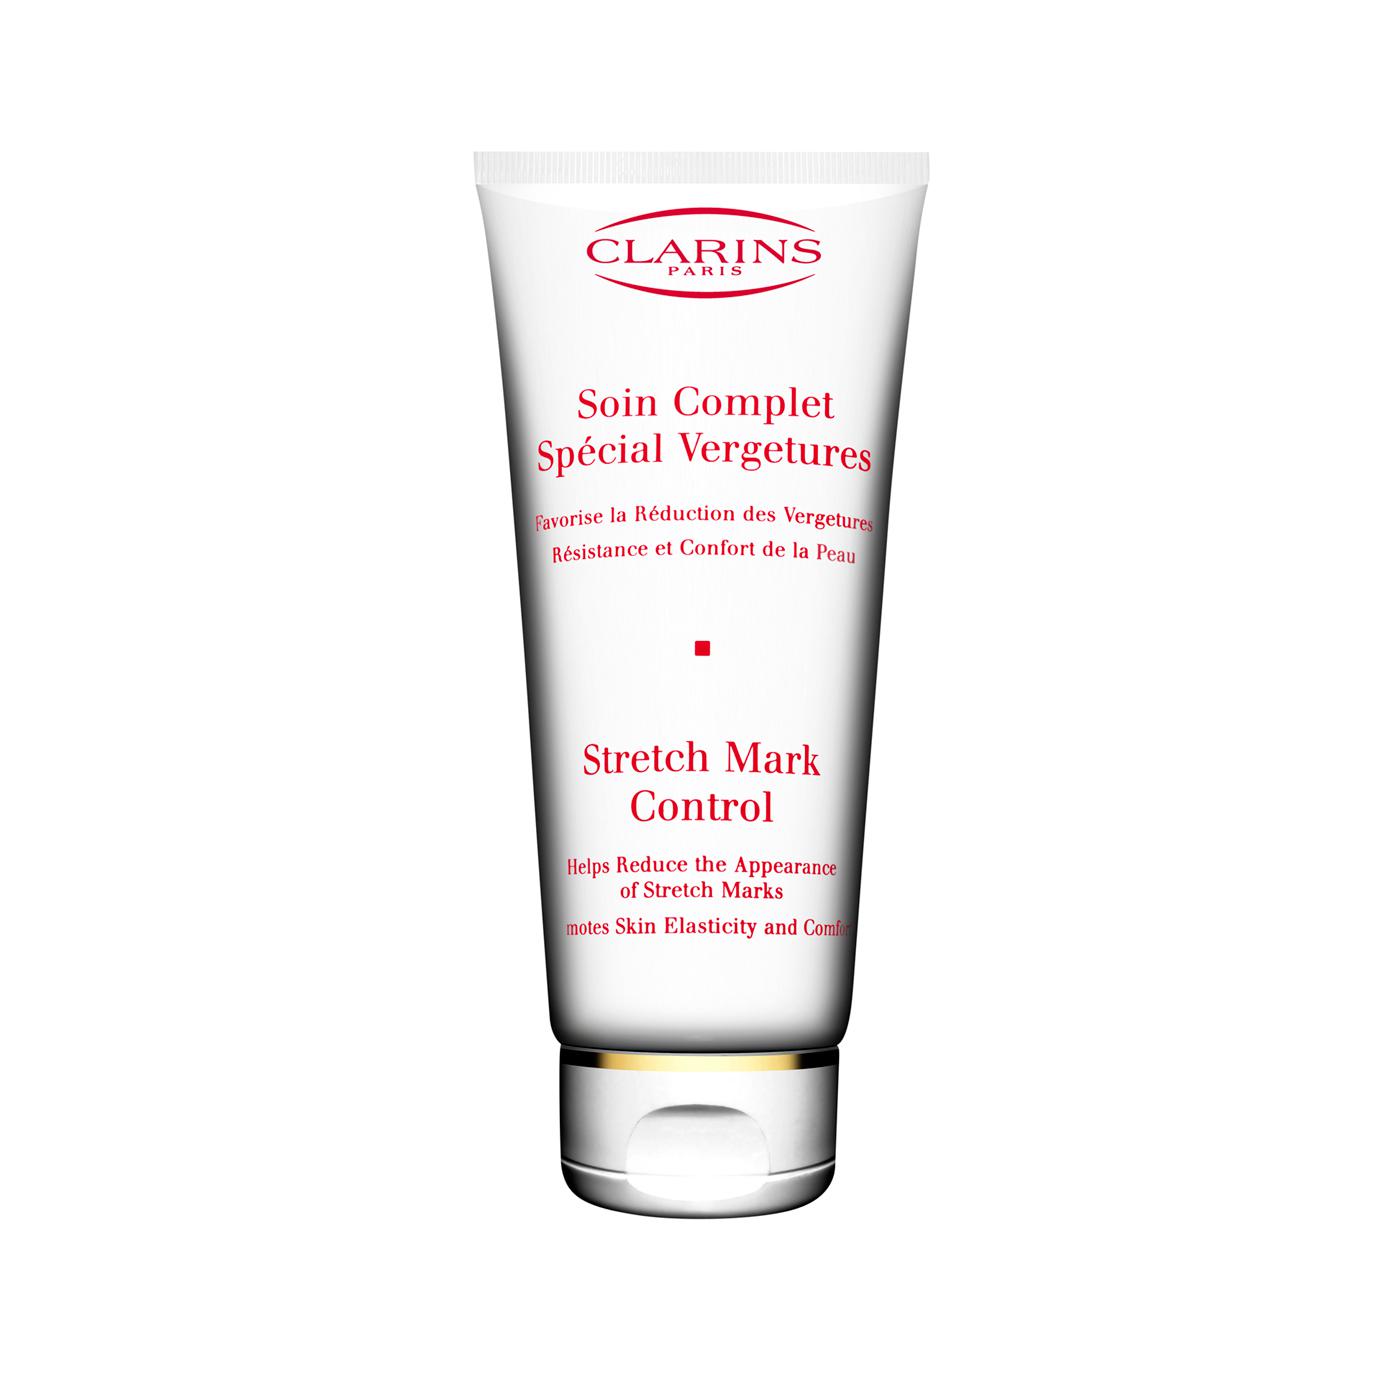 clarins_soin-complet-special-vergetures